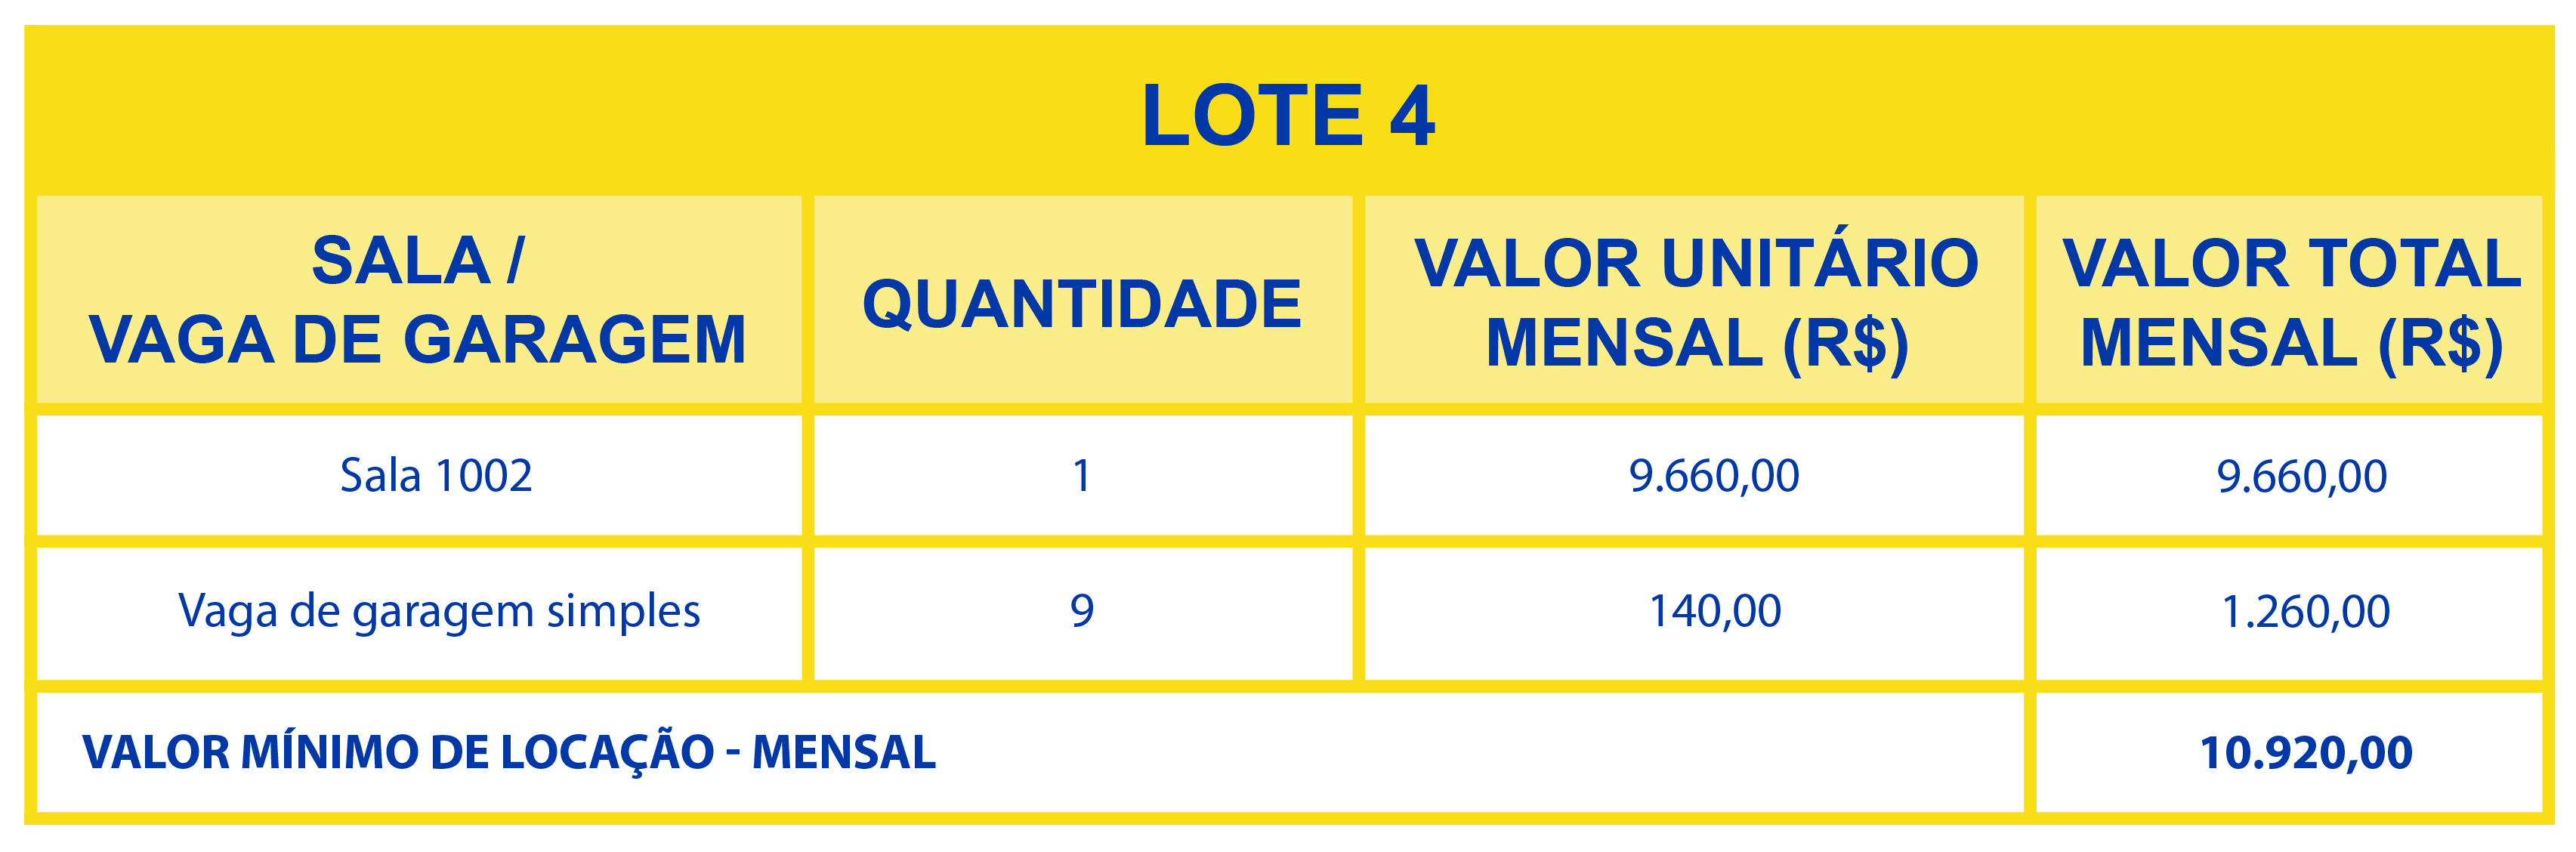 LOTE 4